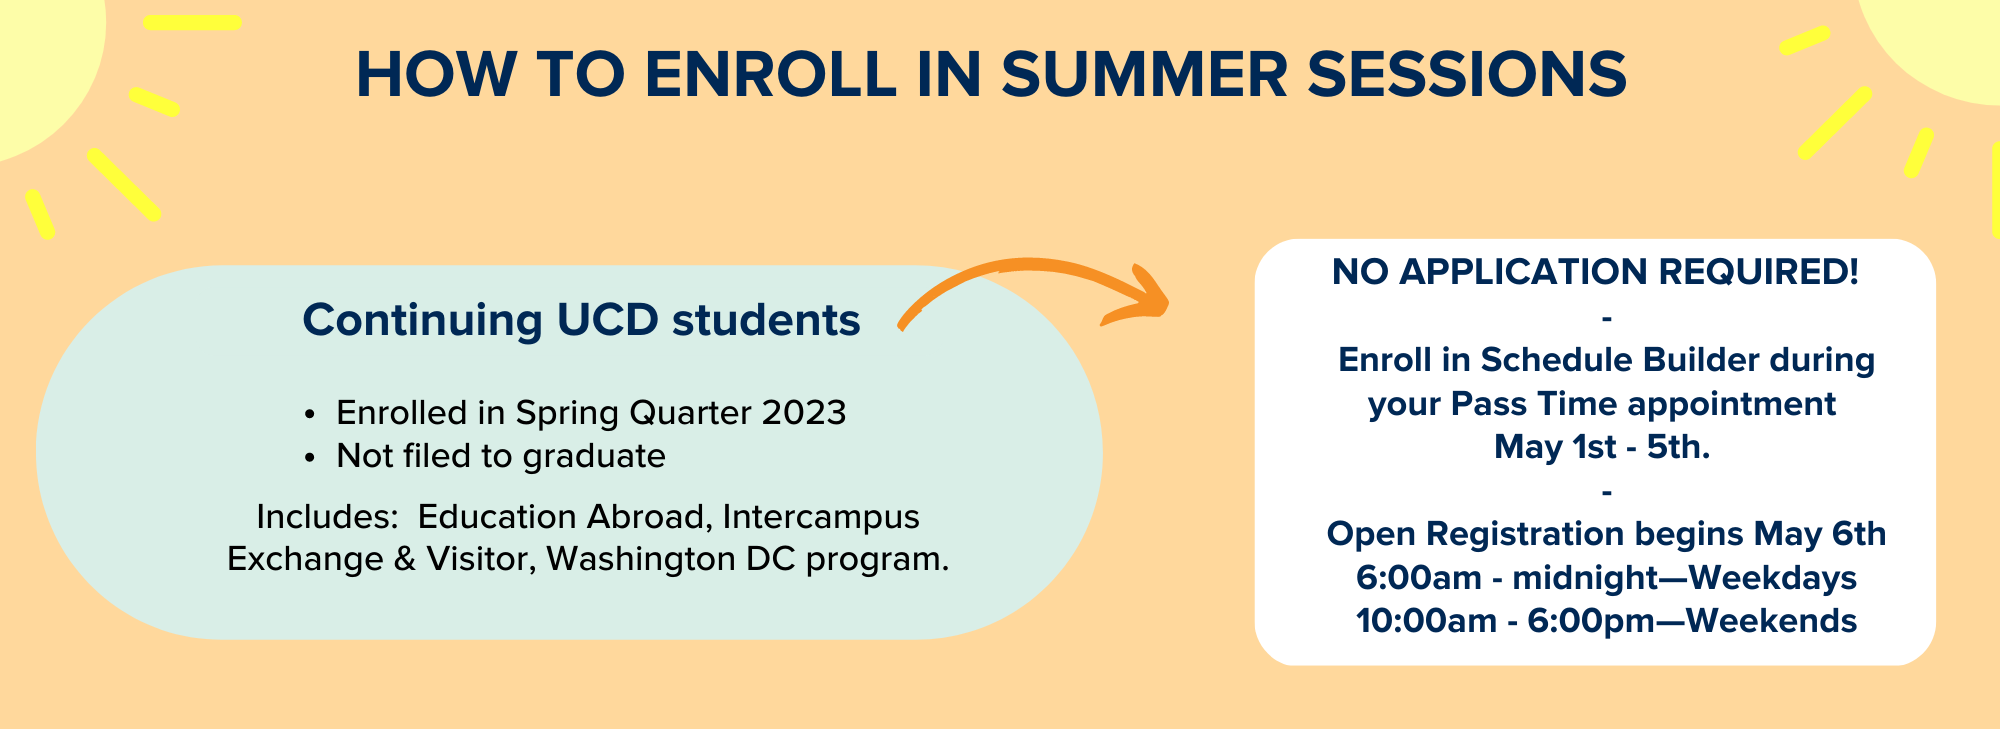 How to Enroll in Summer Sessions graphic 